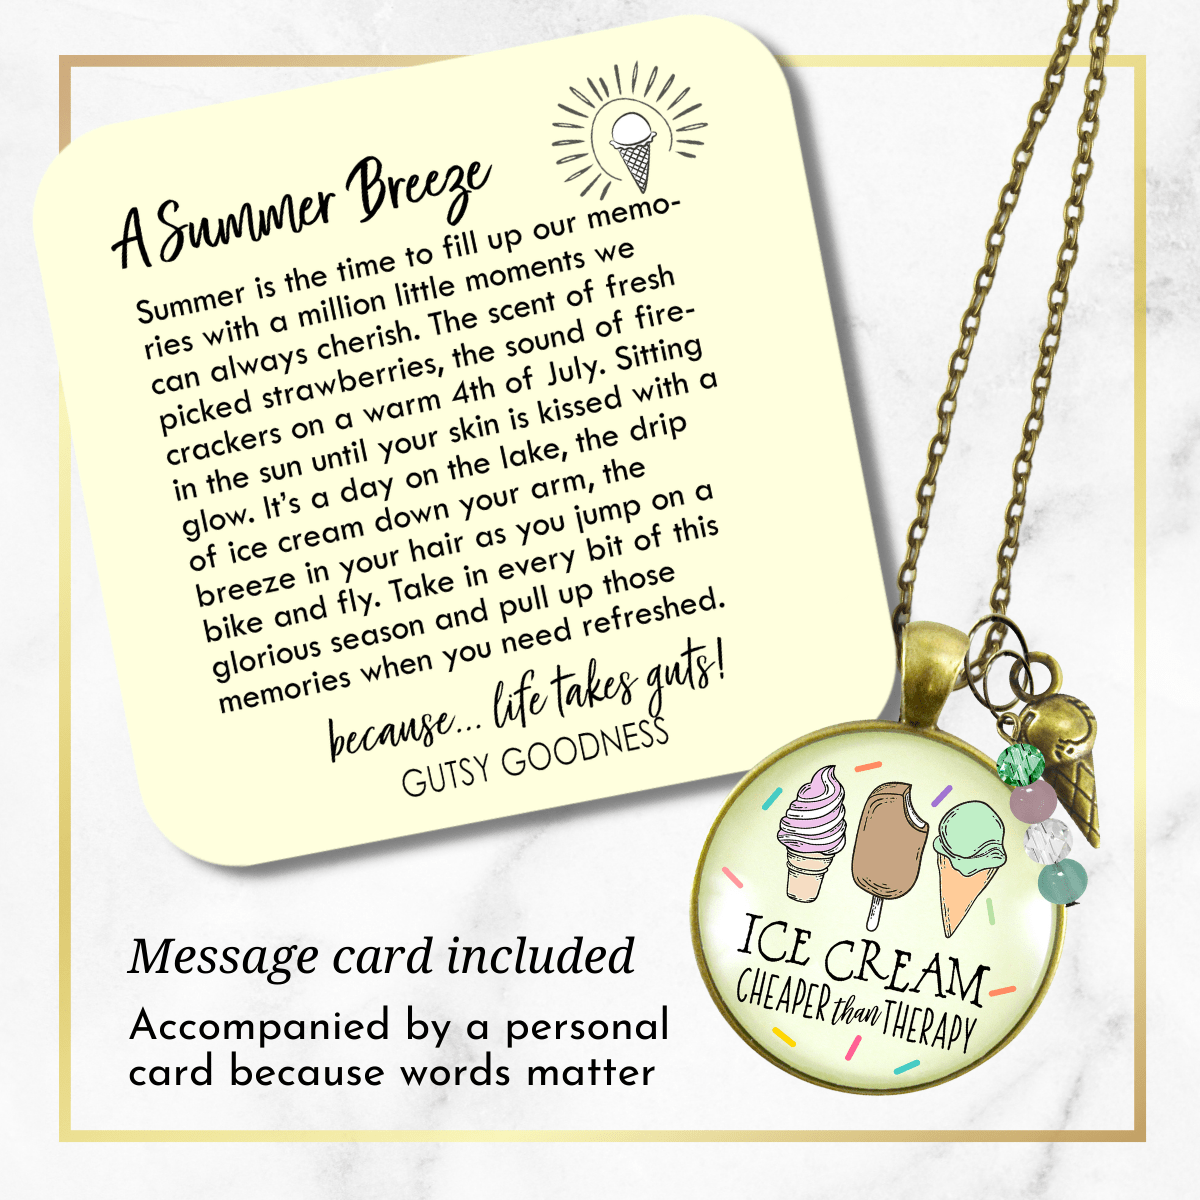 Ice Cream Necklace Cheaper Than Therapy Retro Ice Cream Cone Charm BFF Gift Pendant Summer Jewelry  Necklace - Gutsy Goodness Handmade Jewelry